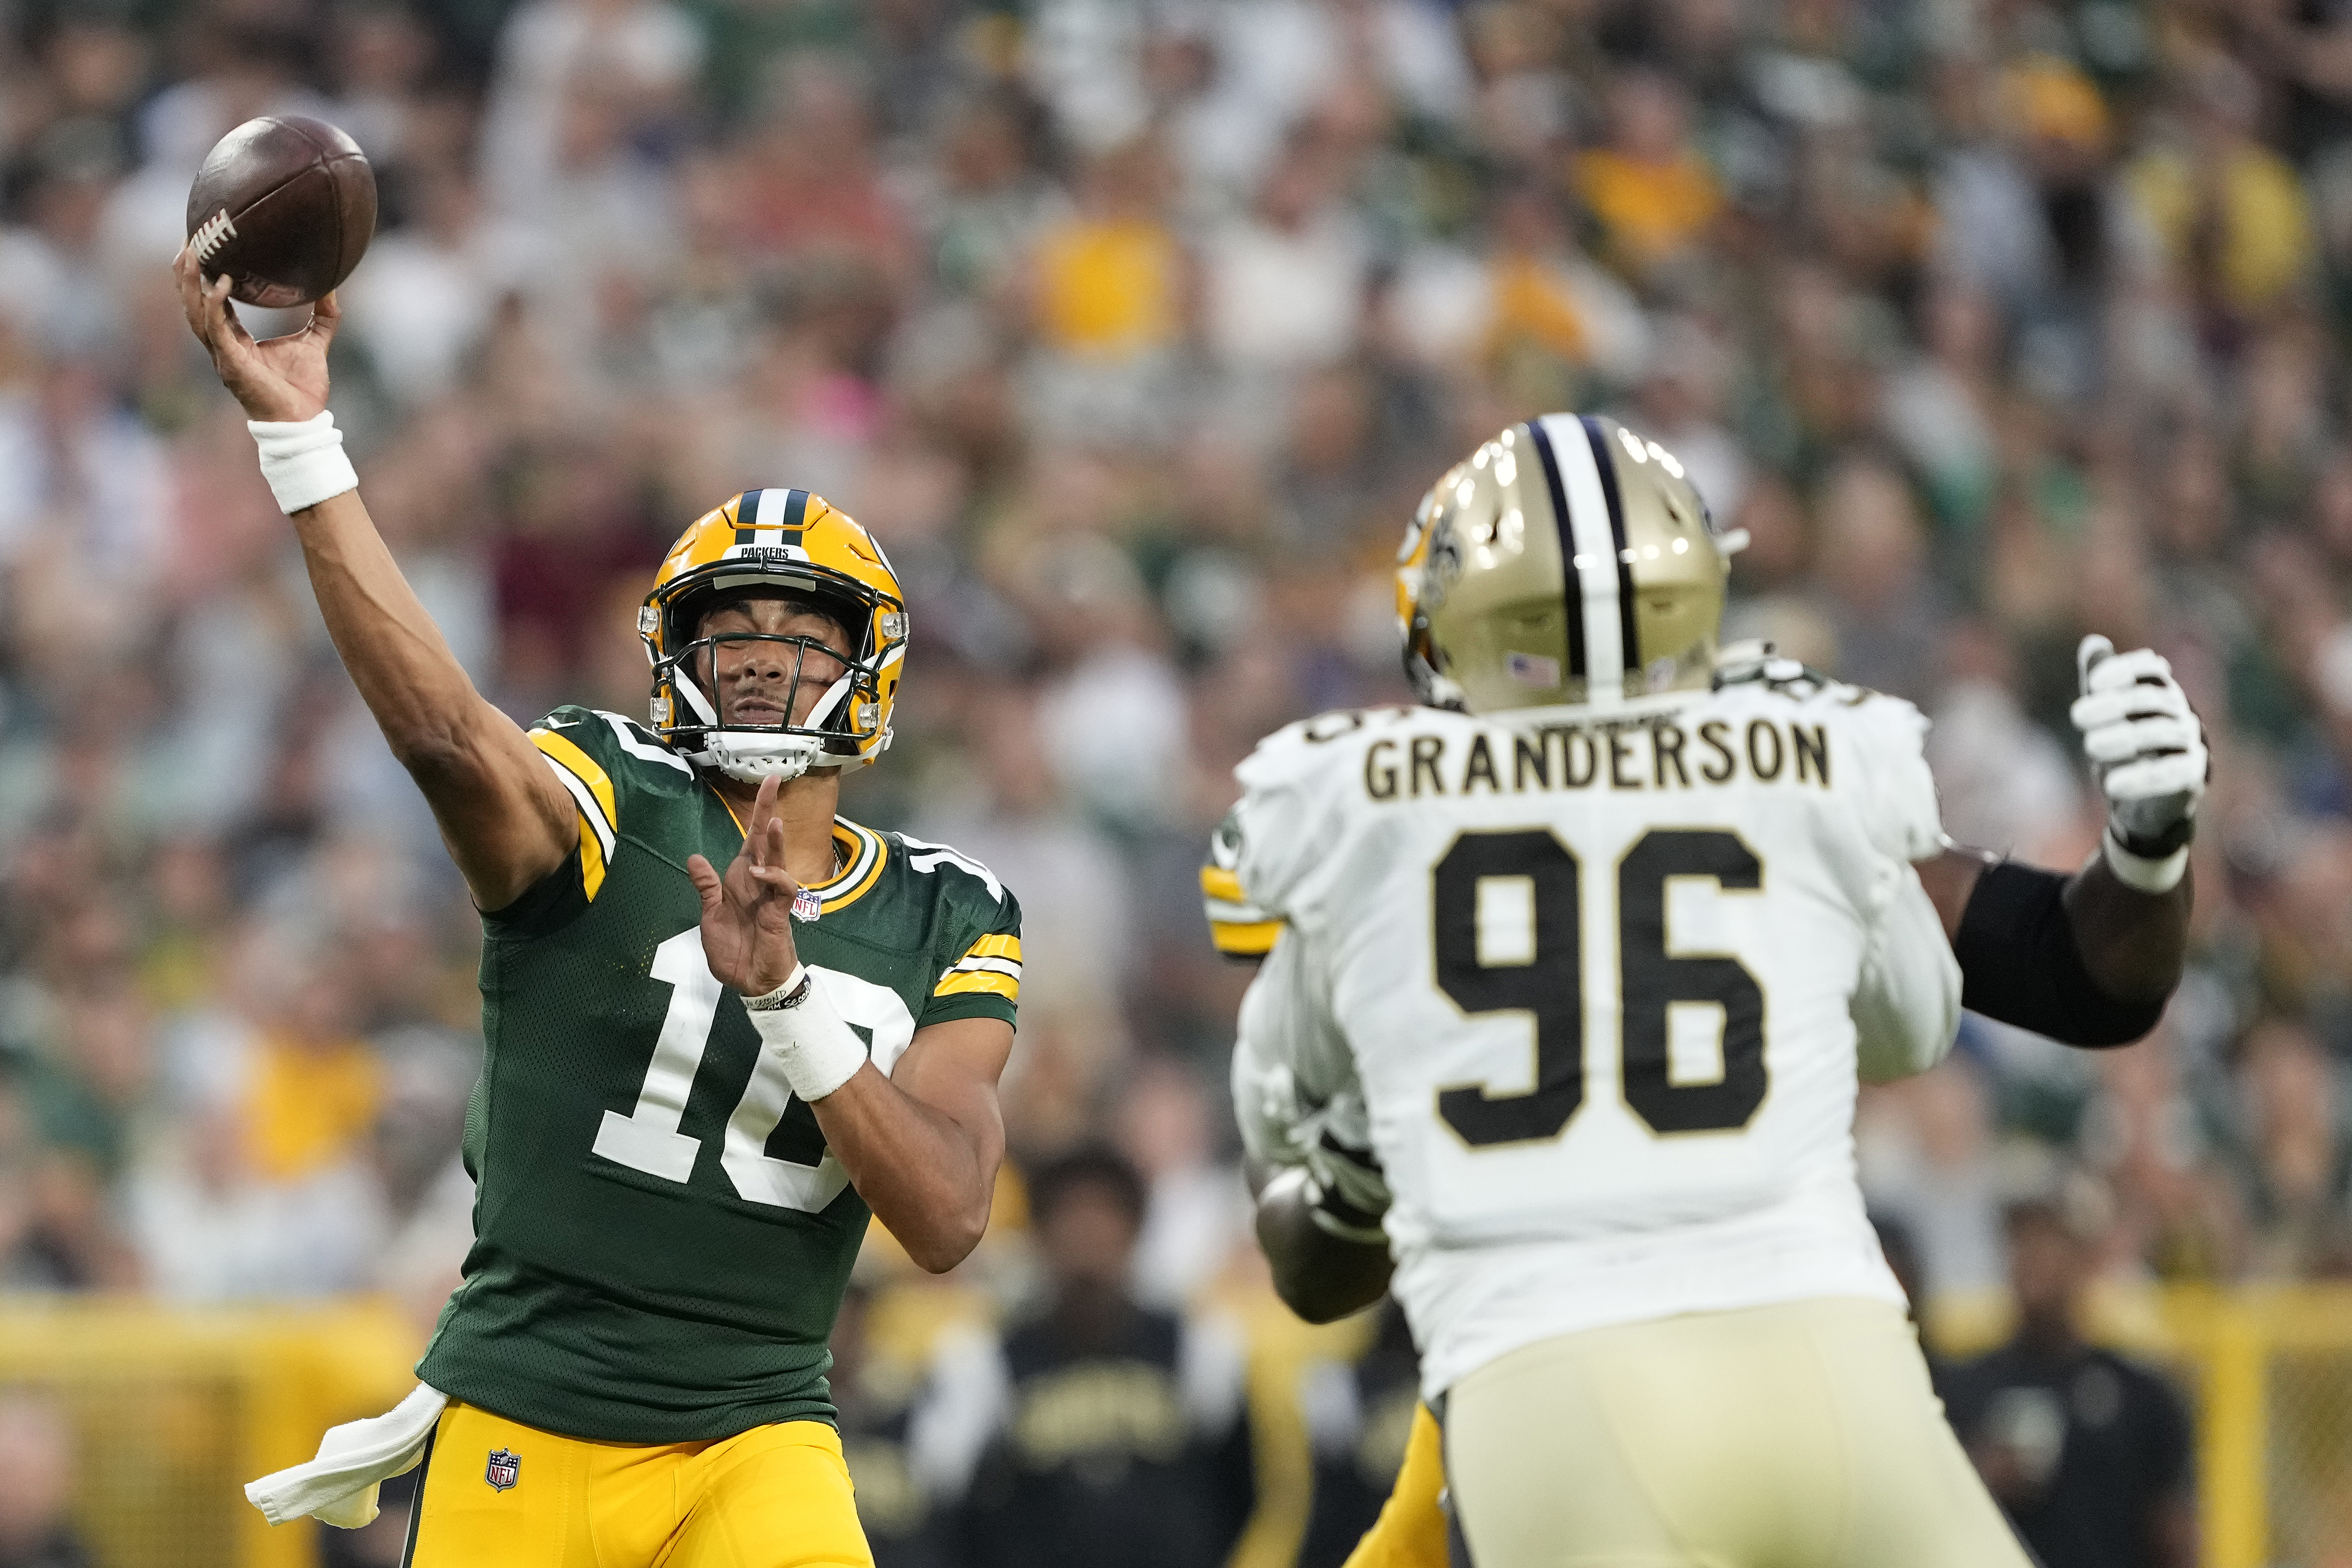 New Orleans Saints v Green Bay Packers